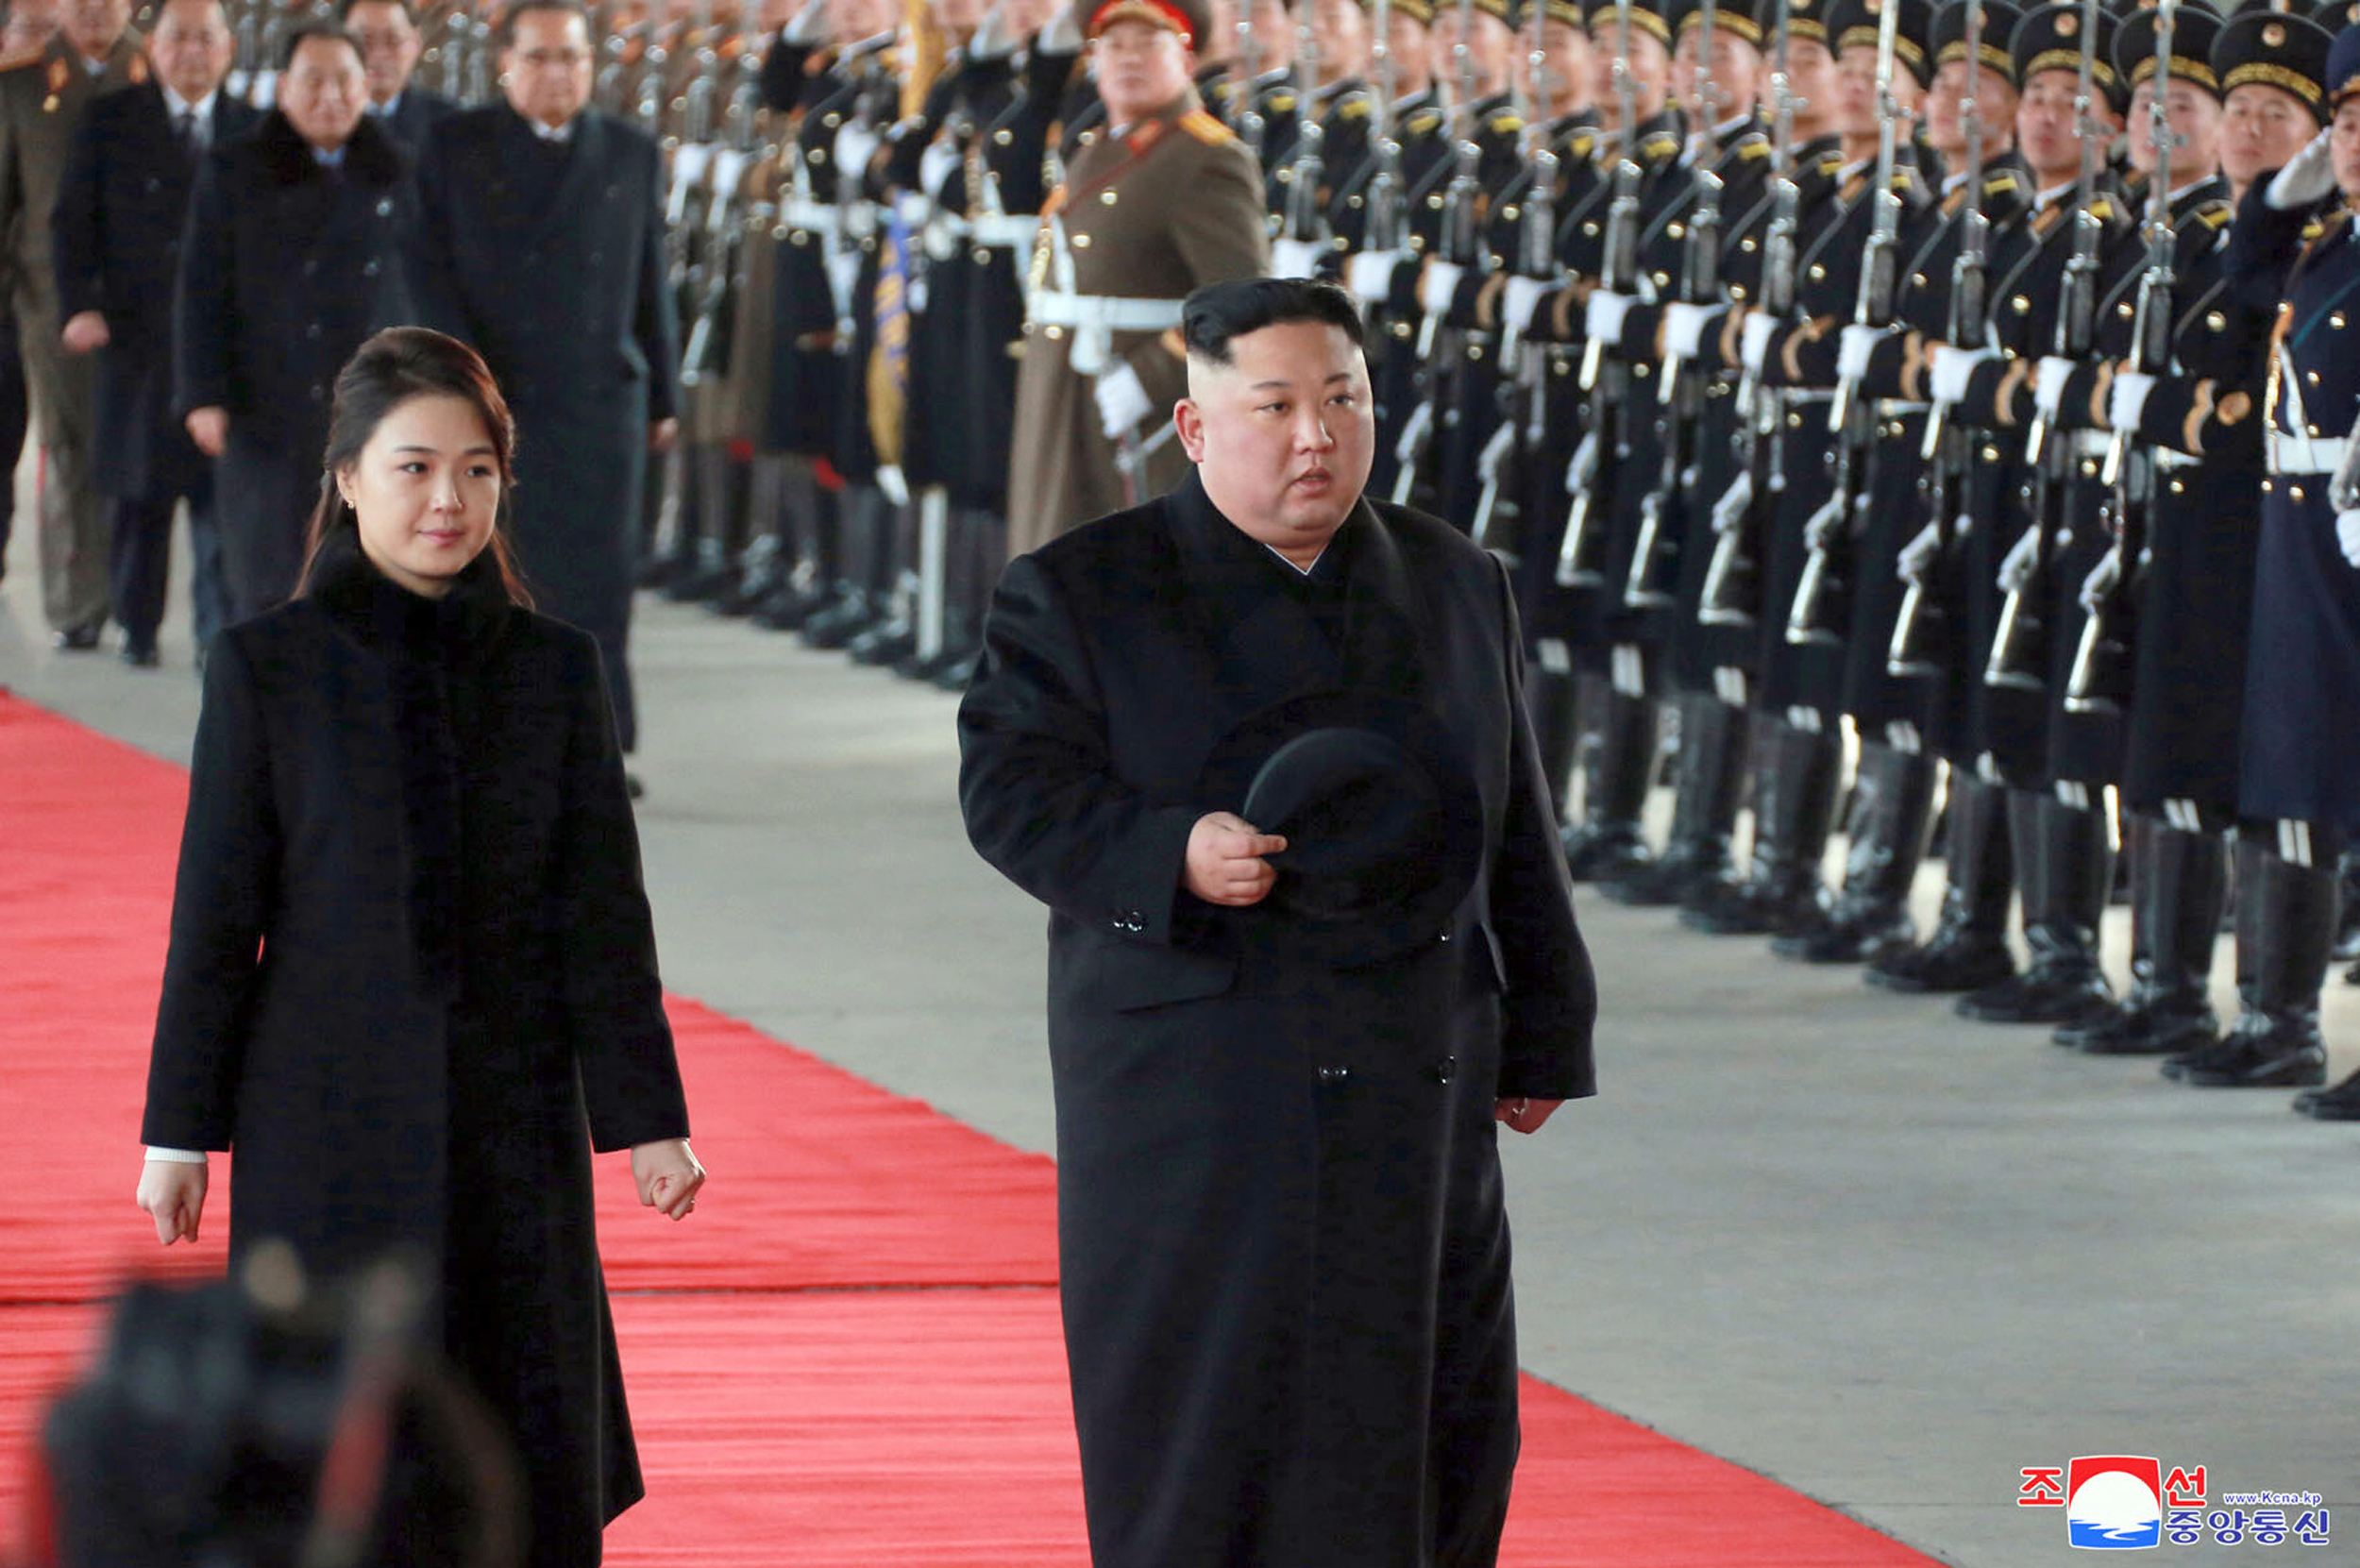 In this Monday, Jan. 7, 2019, photo provided on Tuesday, Jan. 8, 2019 by the North Korean government, North Korean leader Kim Jong Un walks with his wife Ri Sol Ju at Pyongyang Station in Pyongyang, North Korea, before leaving for China.